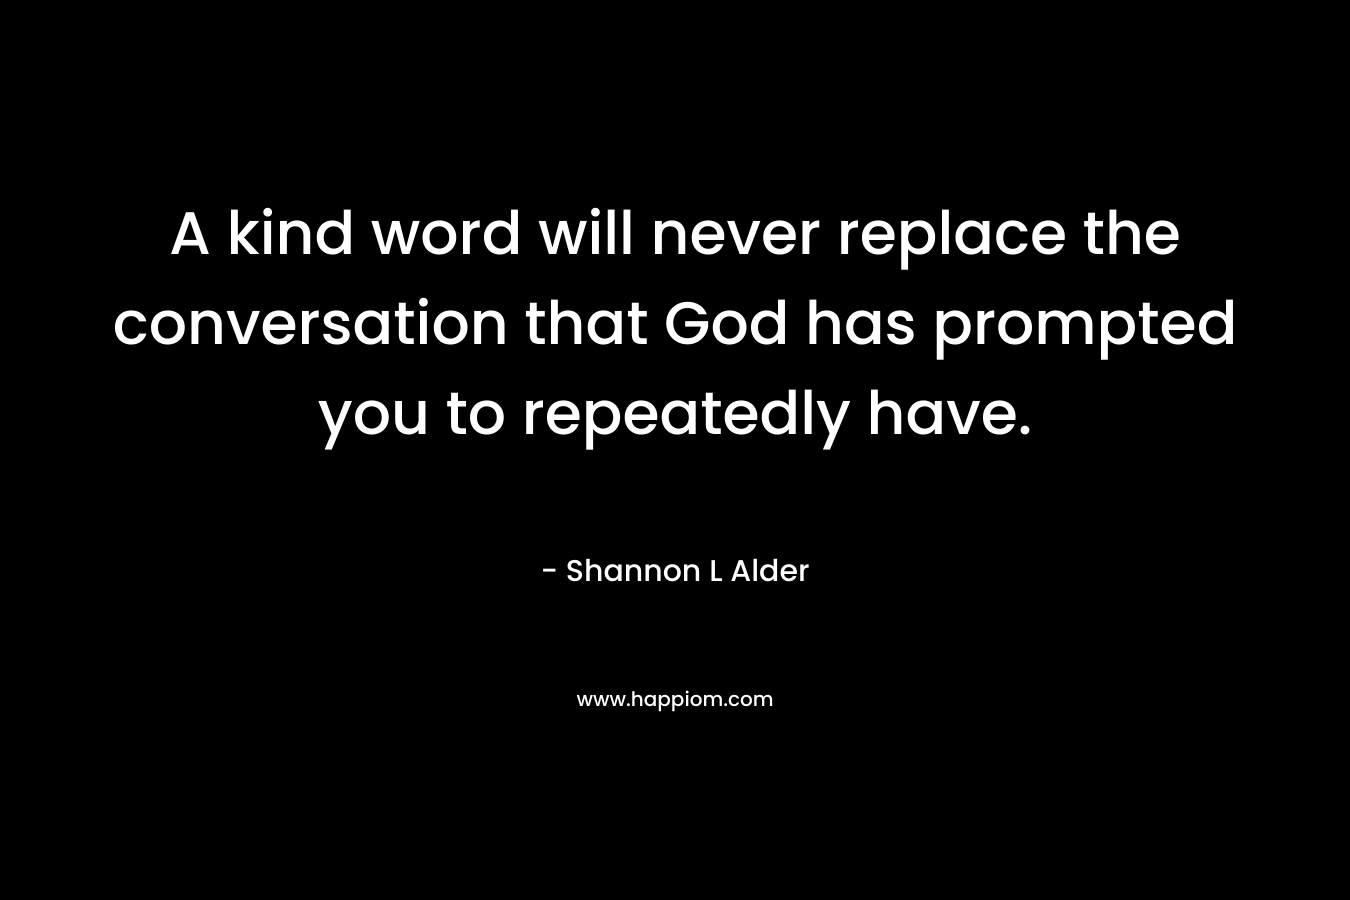 A kind word will never replace the conversation that God has prompted you to repeatedly have.